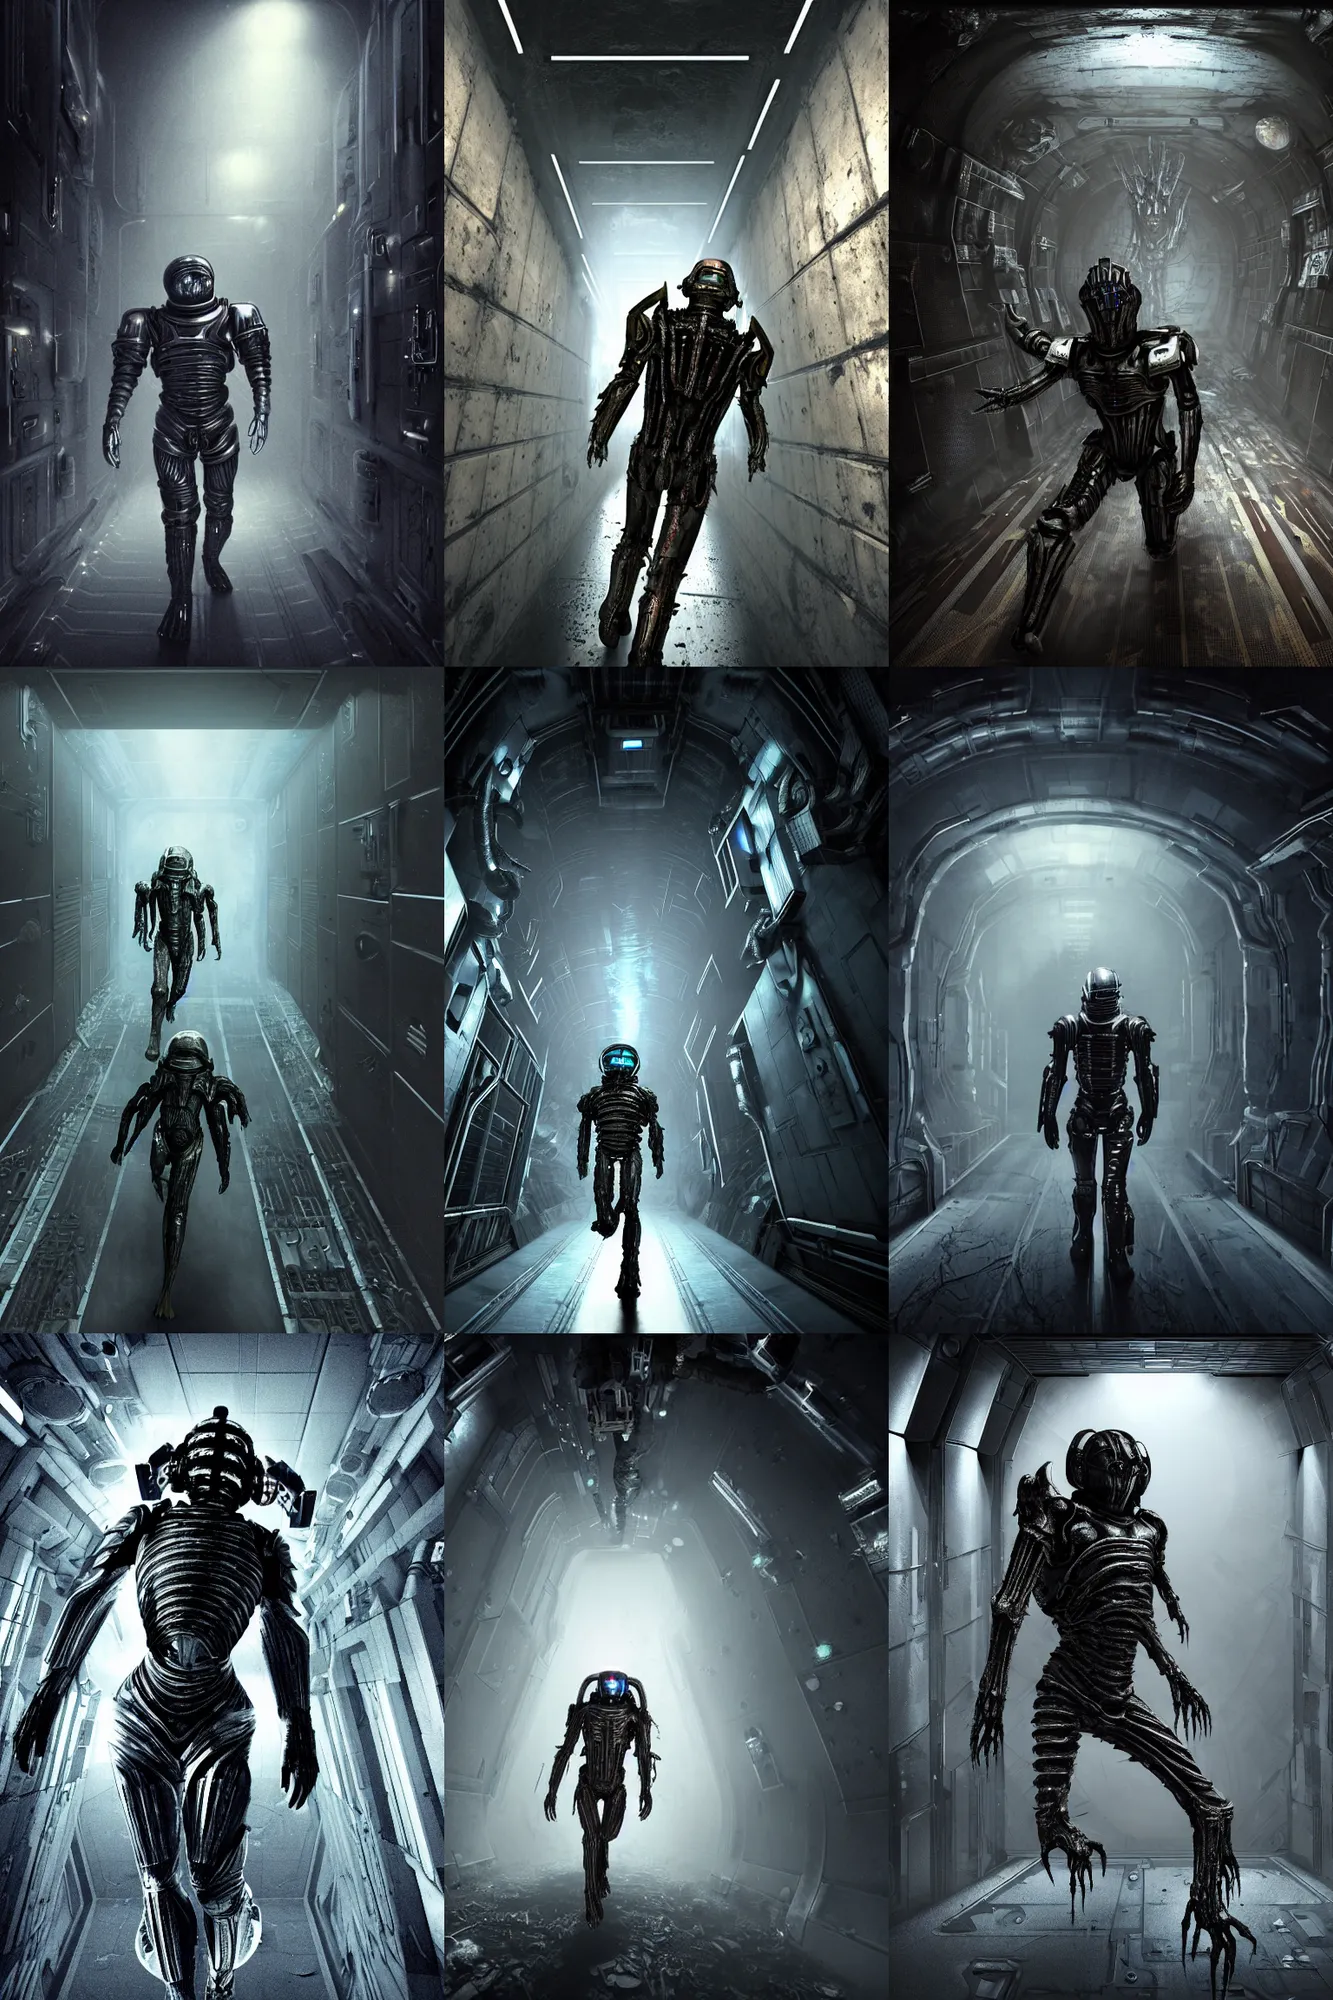 Prompt: horror movie scene of an individual in futuristic armor being chased down a hallway, running through a deep space mining space station designed by hr giger, rusty metal walls, broken pipes, side angle, dark colors, muted colors, tense atmosphere, mist floats in the air, amazing value control, dead space, moody colors, dramatic lighting, ussg ishimura, frank frazetta,